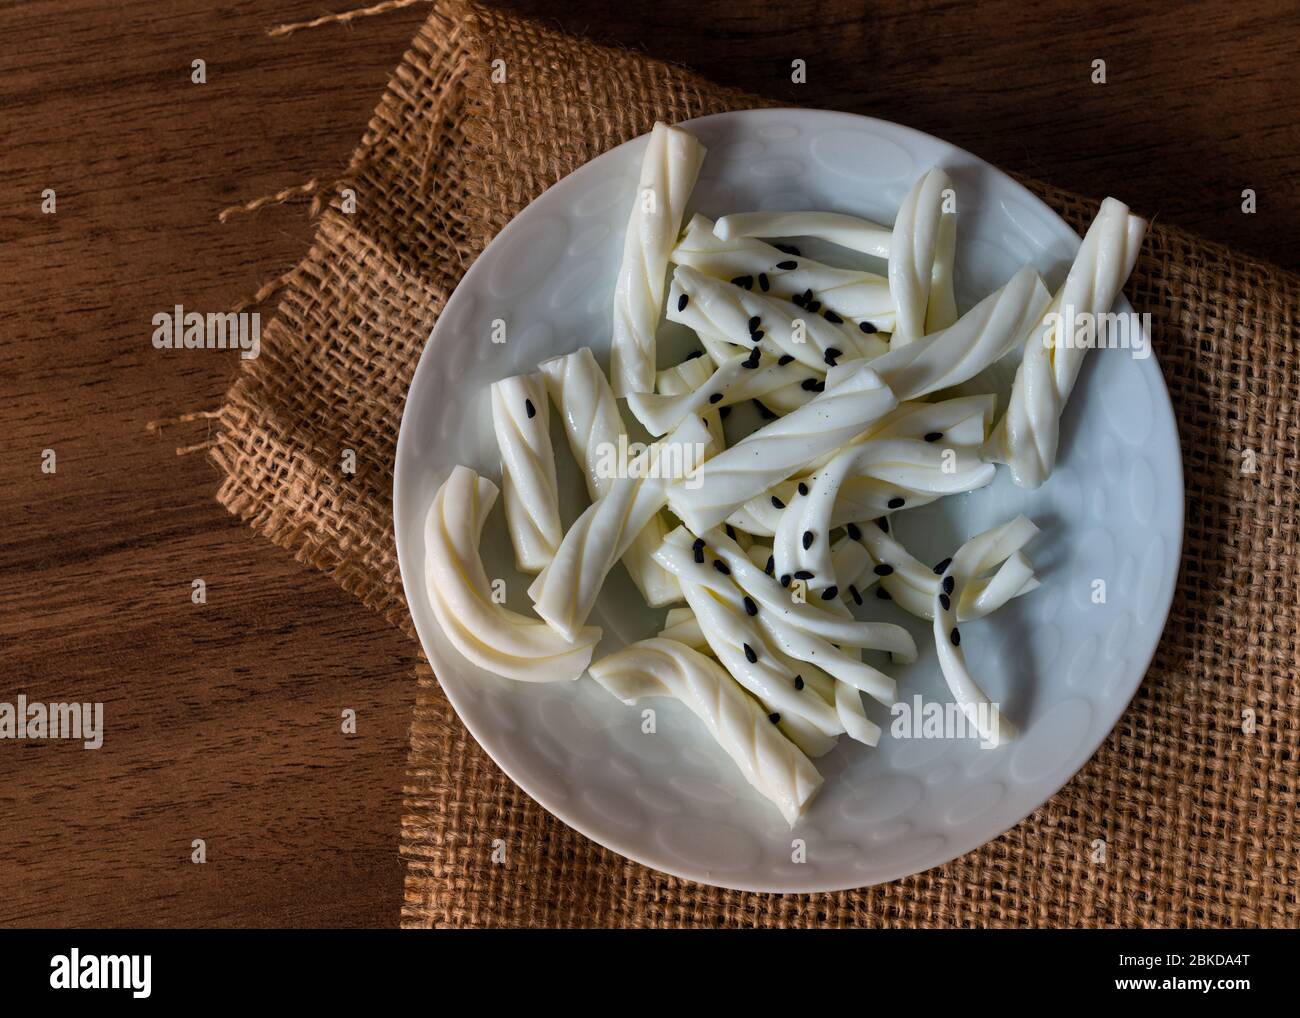 White braided cheese with black sesame served in a white plate Stock Photo